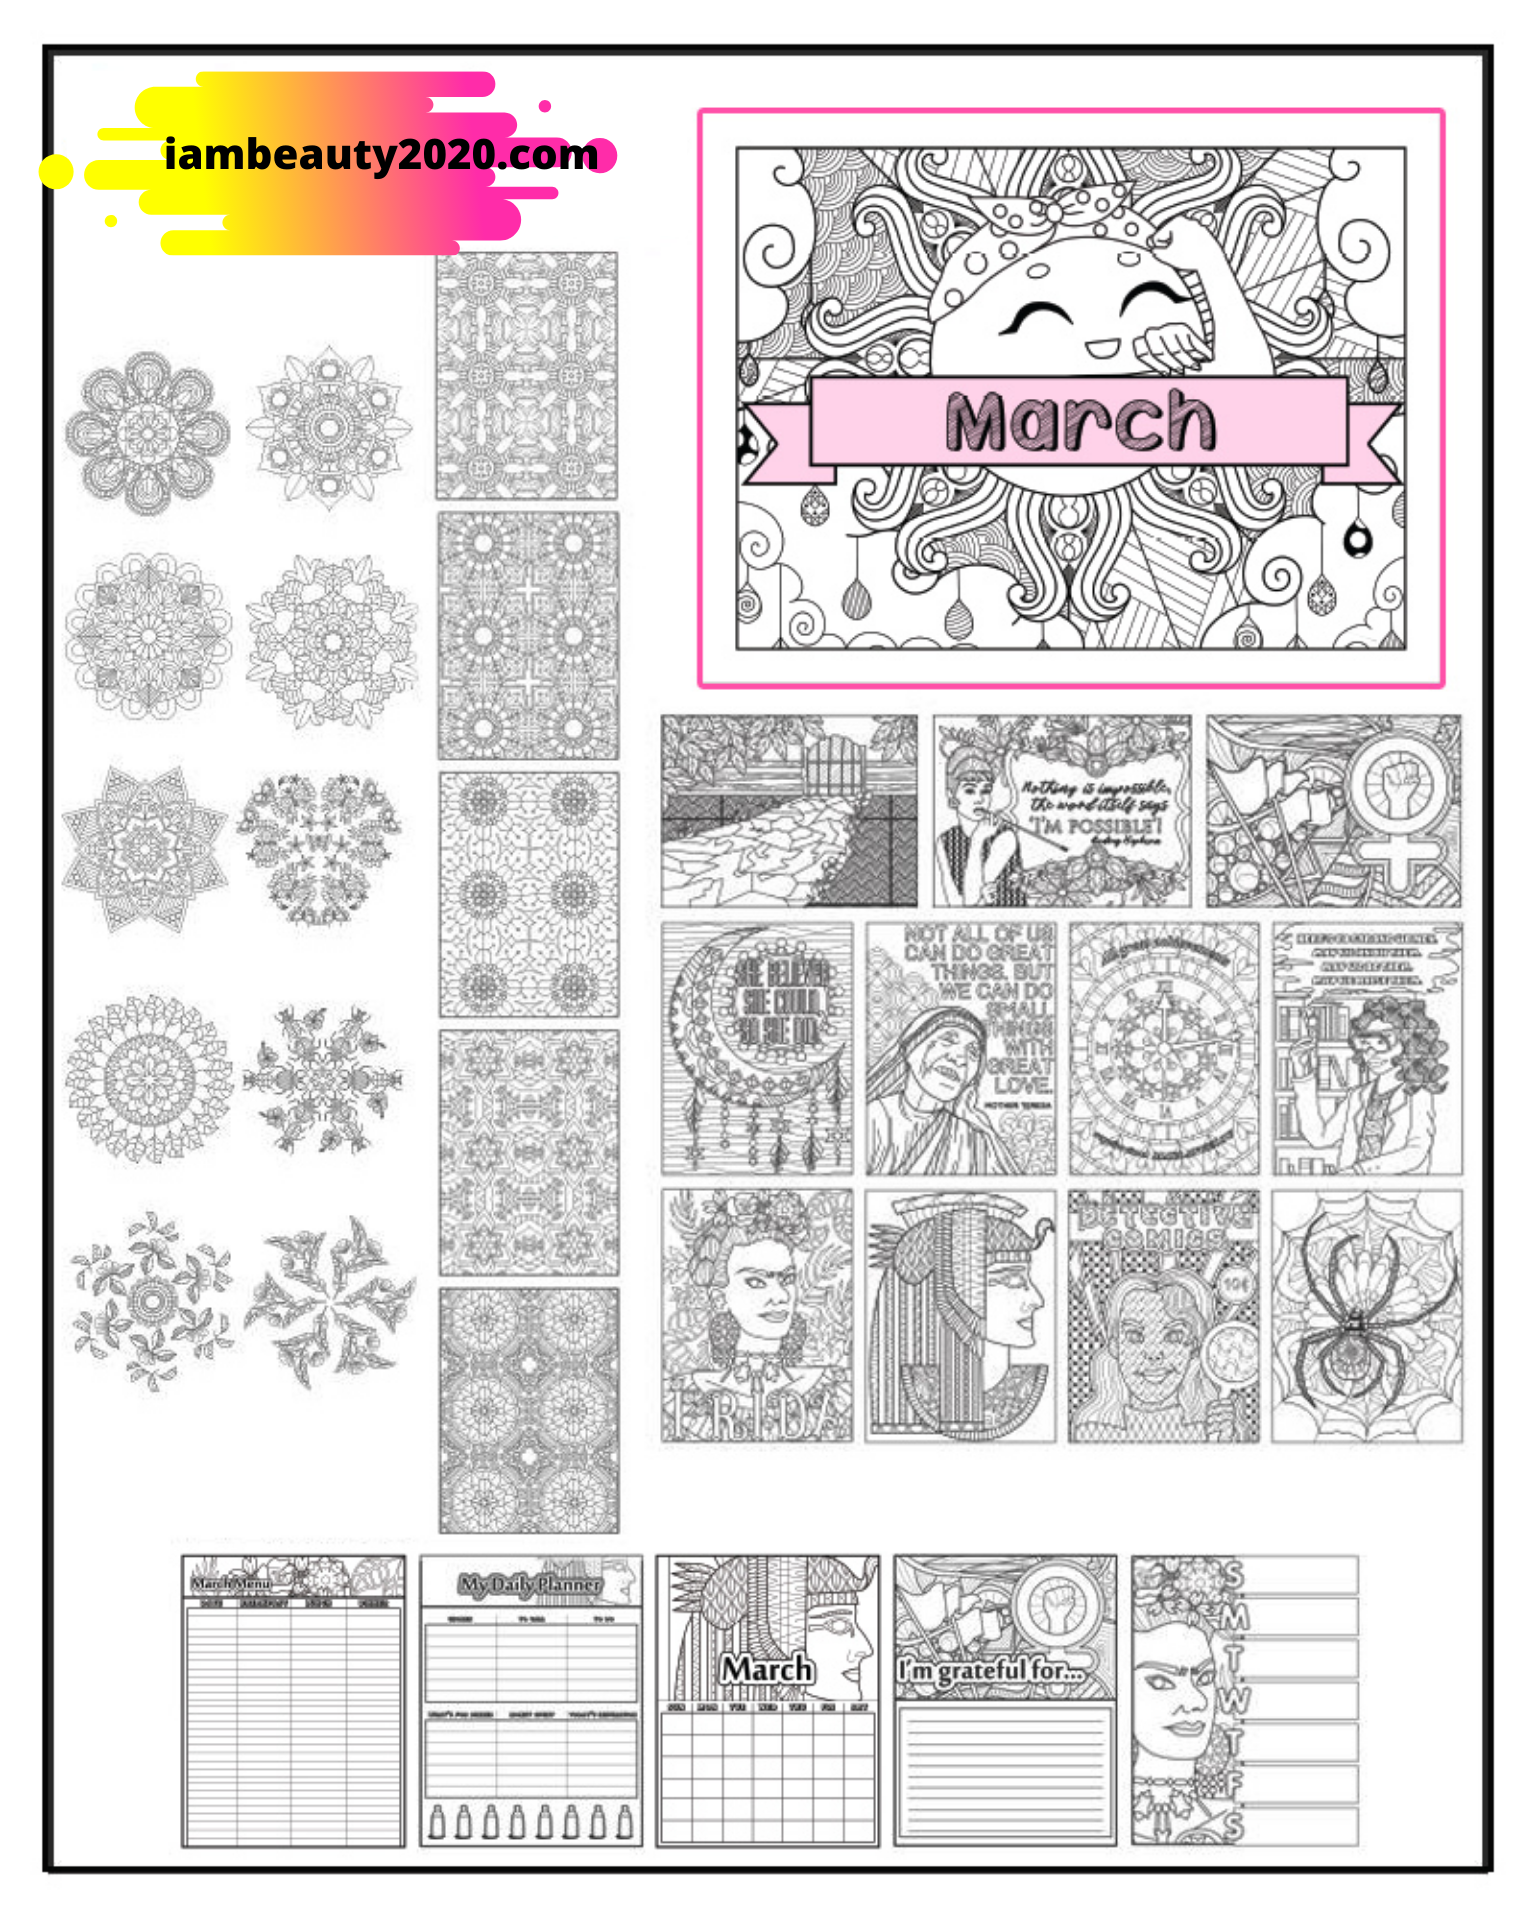 Printable Adult Coloring Book Pages & March Calendar Planner PDF Bundle - I Am Beauty Watch Me Soar! Skincare beauty and wellness planner